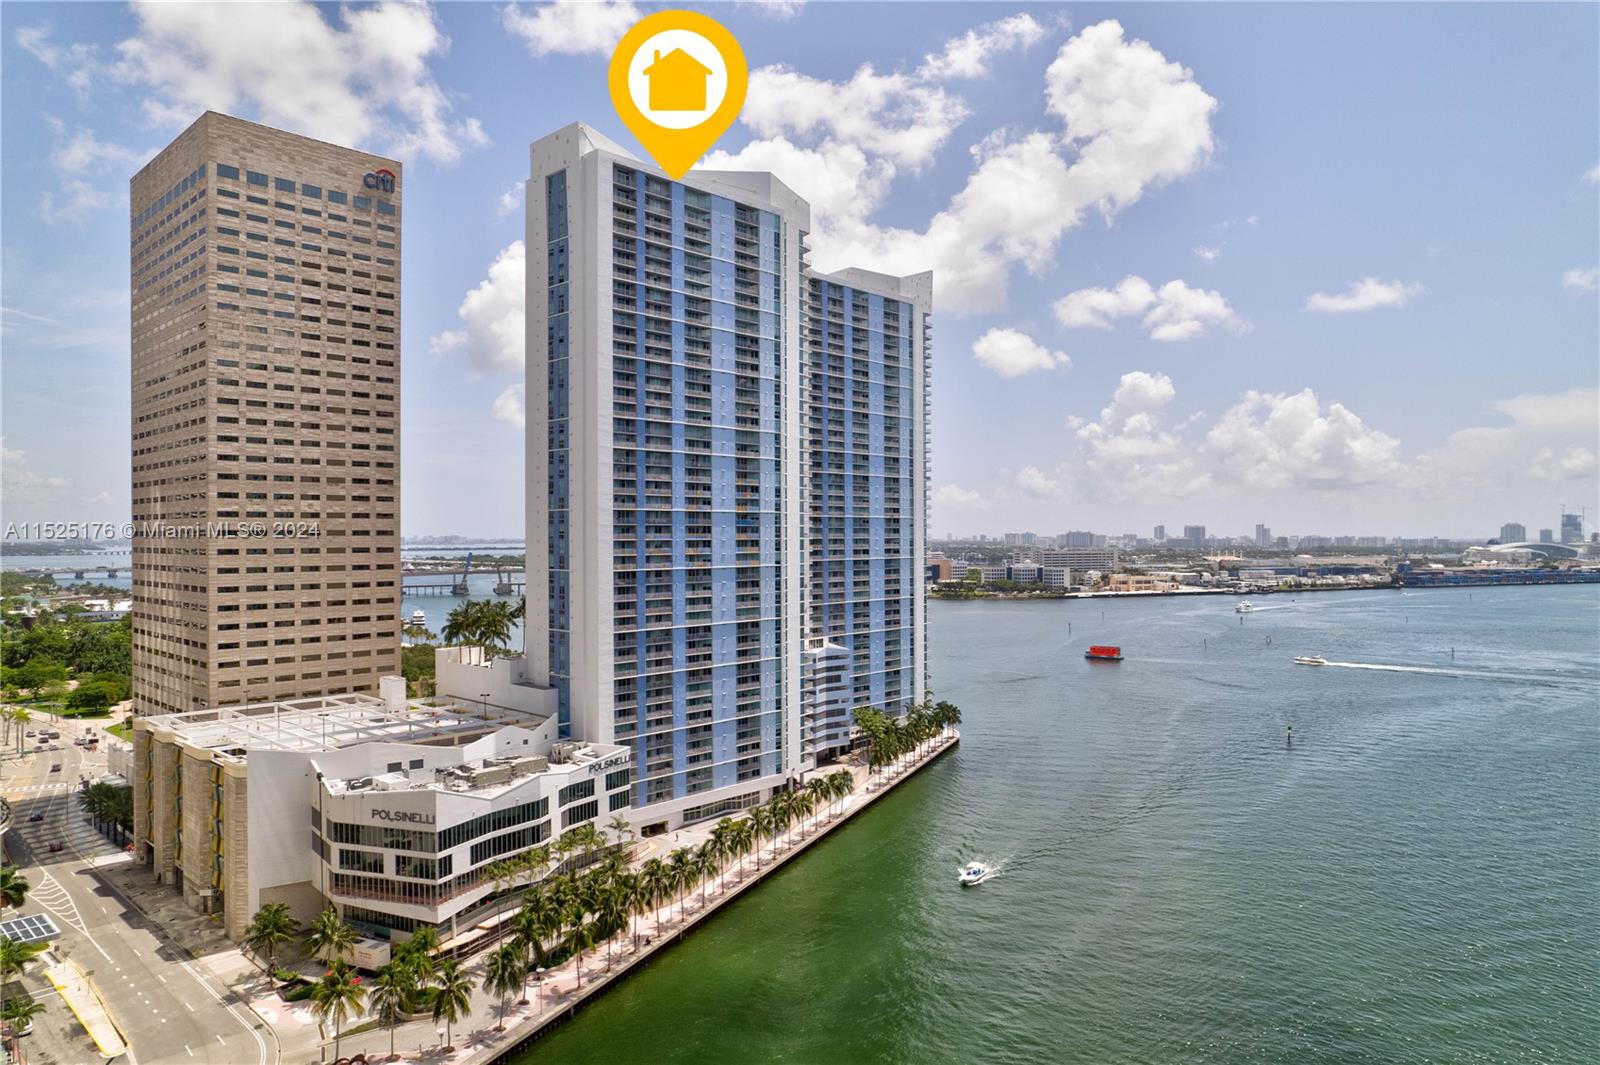 Panoramic views of Biscayne Bay, Miami River, and the City's Skyline from this substantially remodeled unit. One Miami offers excellent amenities that include fitness center, business center, infinity heated pool, full service 24 hours concierge, valet parking.  Enjoy the ideal Miami life style where you can walk to Brickell City Center, Kaseya Center, Perez Art Museum Miami, and some of the city's finest dining destinations.